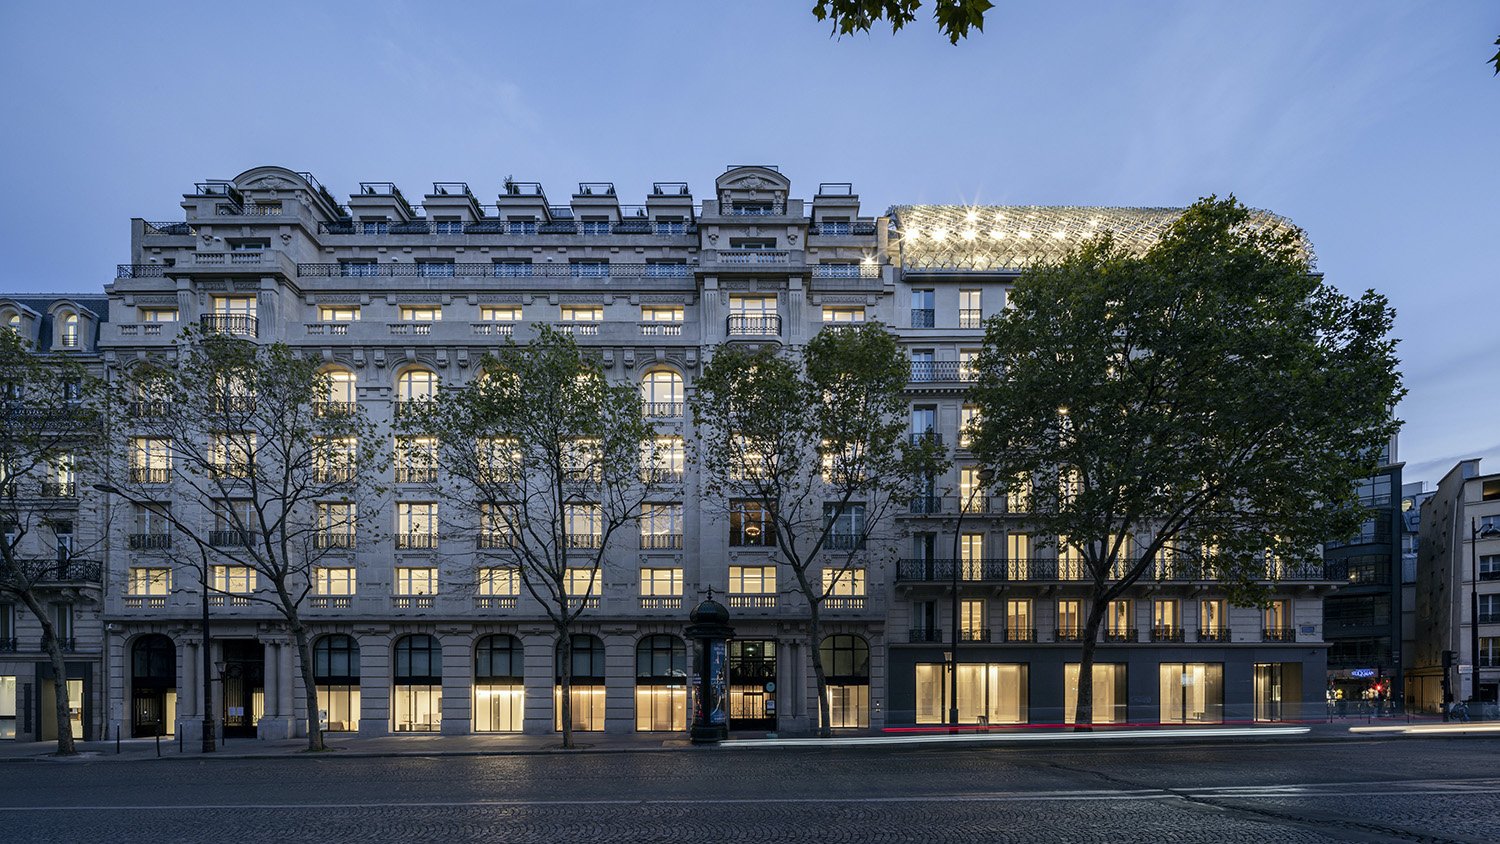 PCA-STREAM brings together two separate buildings: a classical Haussmannian building from 1863 and an Art Déco one from the early 1920s. | ©SALEM MOSTEFAOUI FOR PCA-STREAM